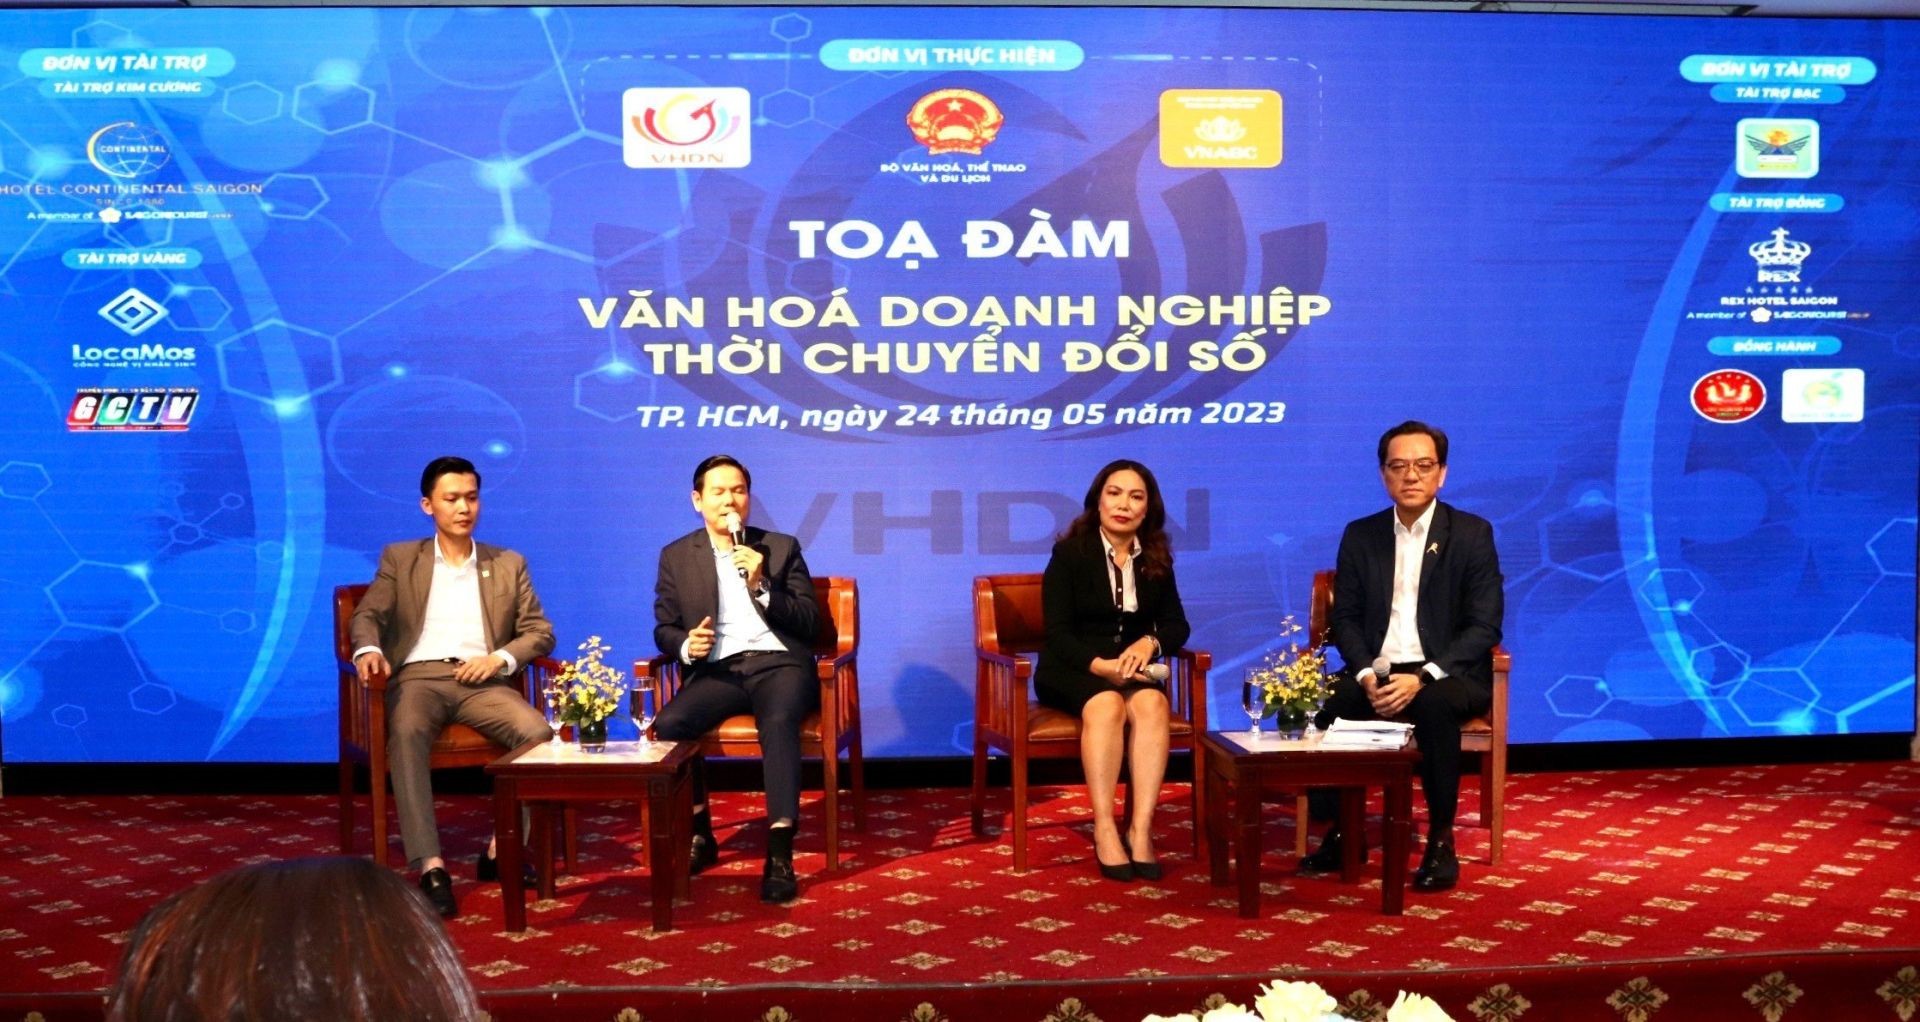 Seminar on the topic "Corporate Culture in the Digital Transformation Era" with the participation of speakers with extensive experience in building and developing a corporate culture in the digital transformation era in Vietnam.